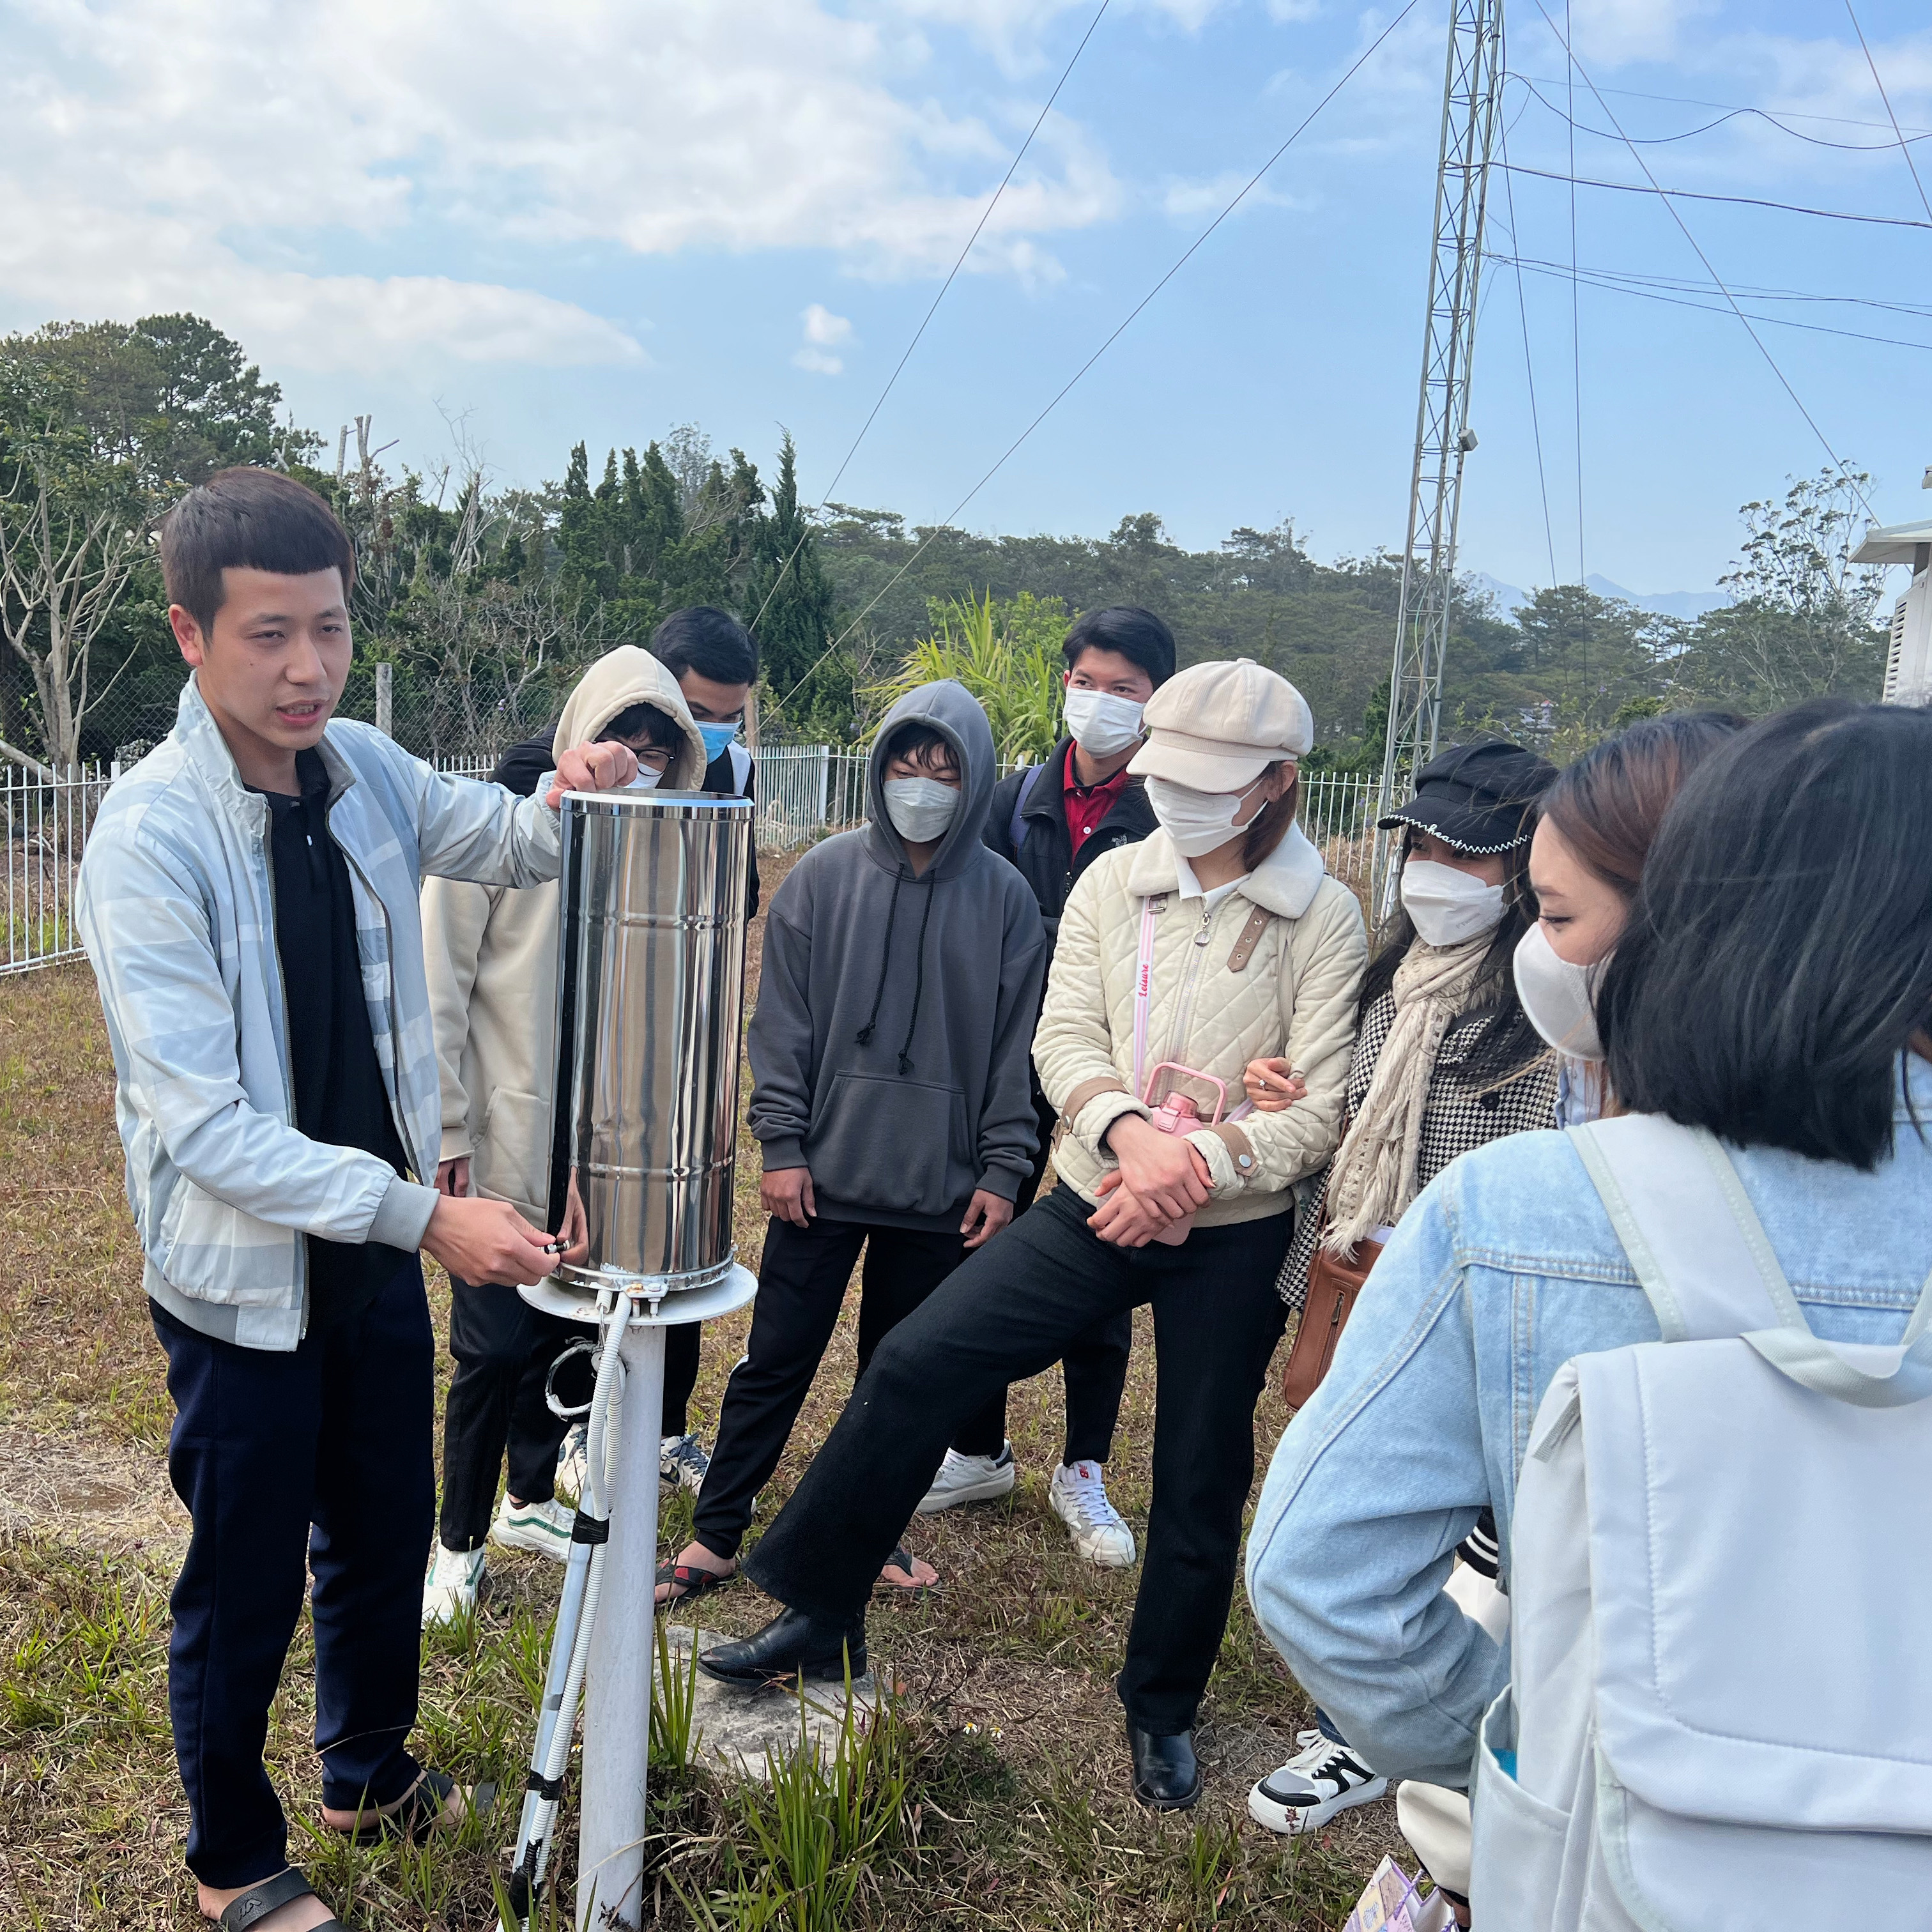 University of Dalat students touring the local government weather station.